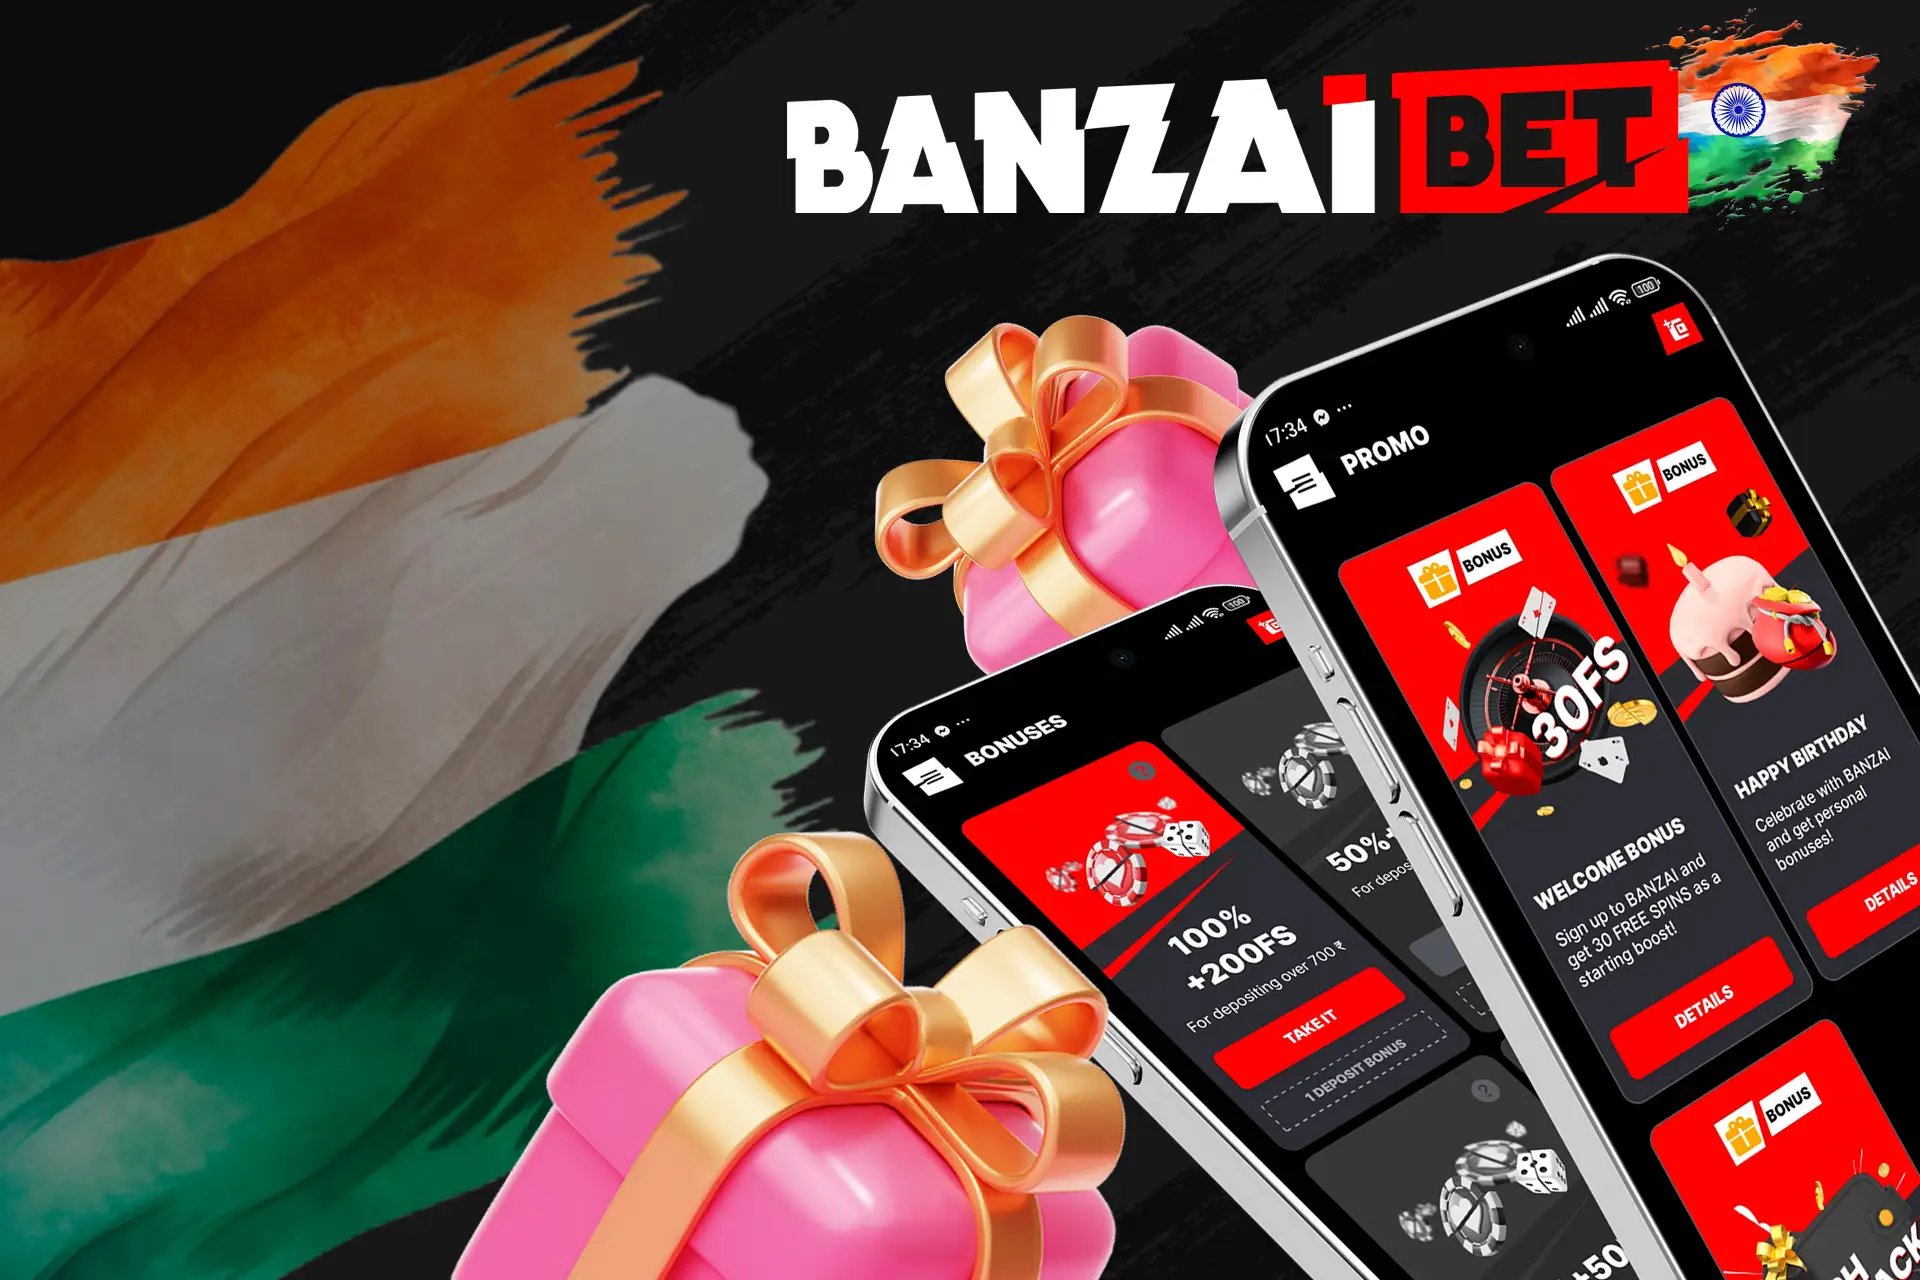 Lots of bonuses are waiting for you at Banzaibet India